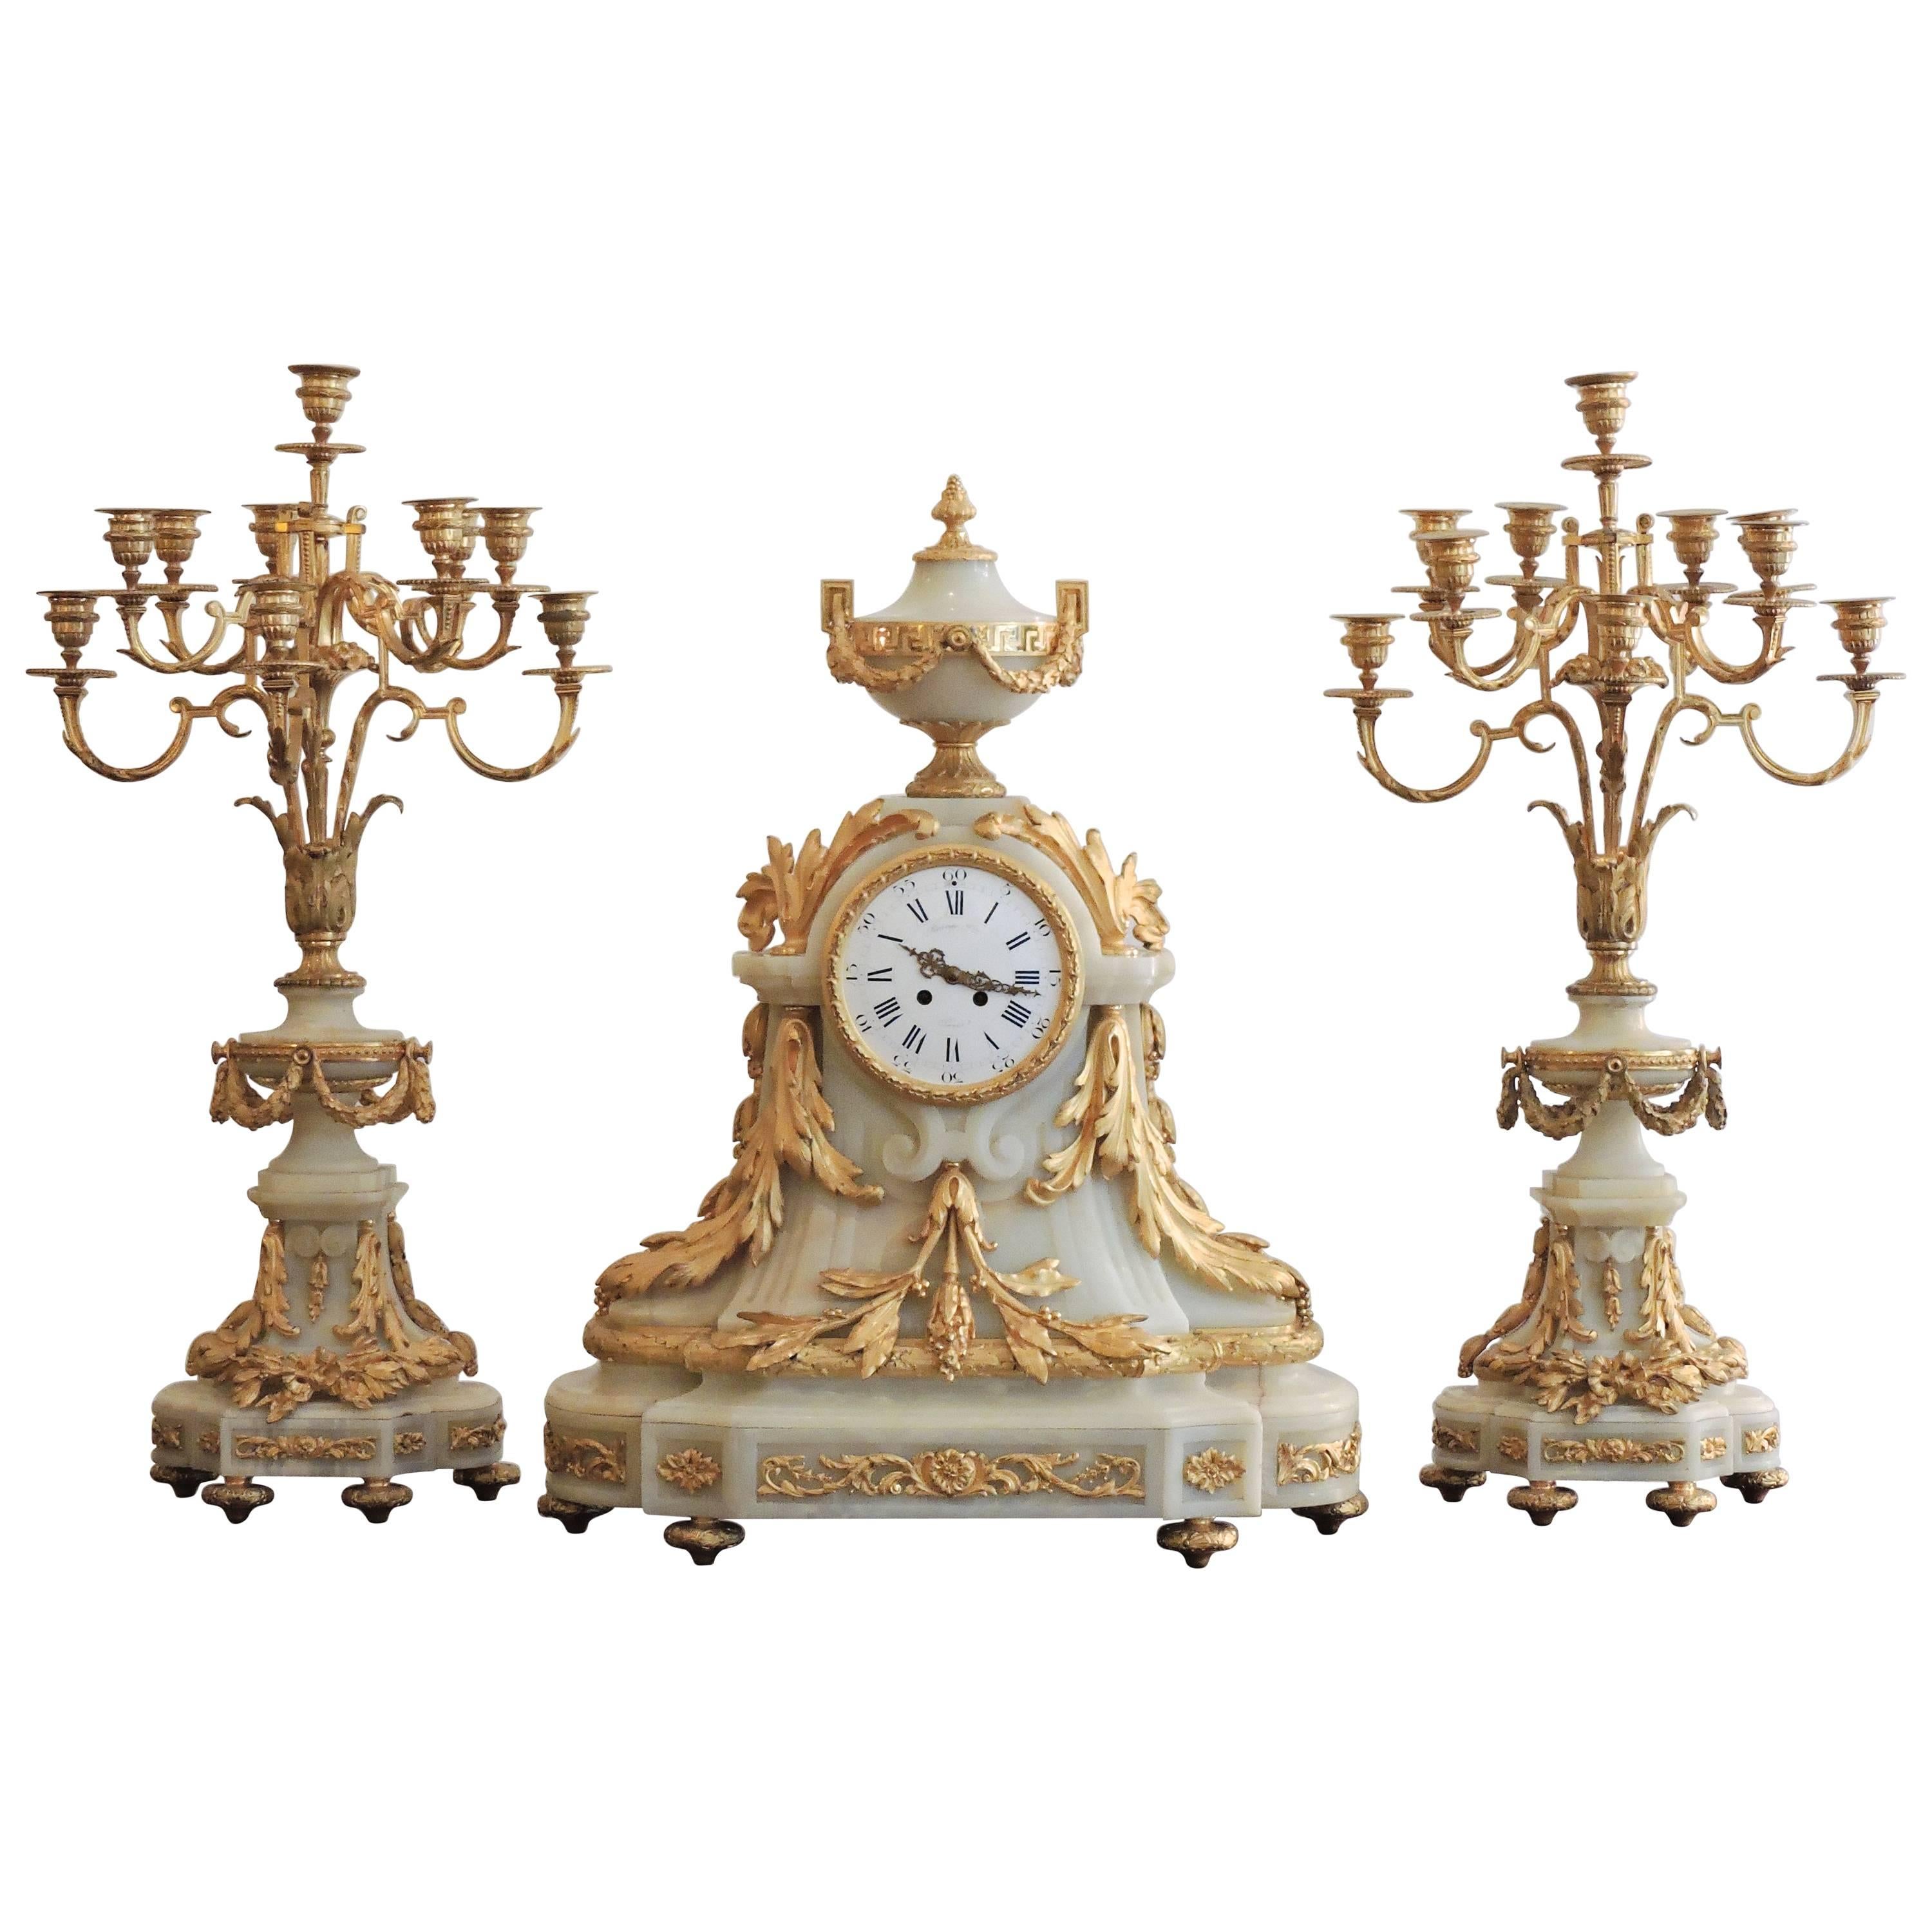 Rare French Ormulu and White Onyx Thee-Piece Clock Garniture by Raingo Freres